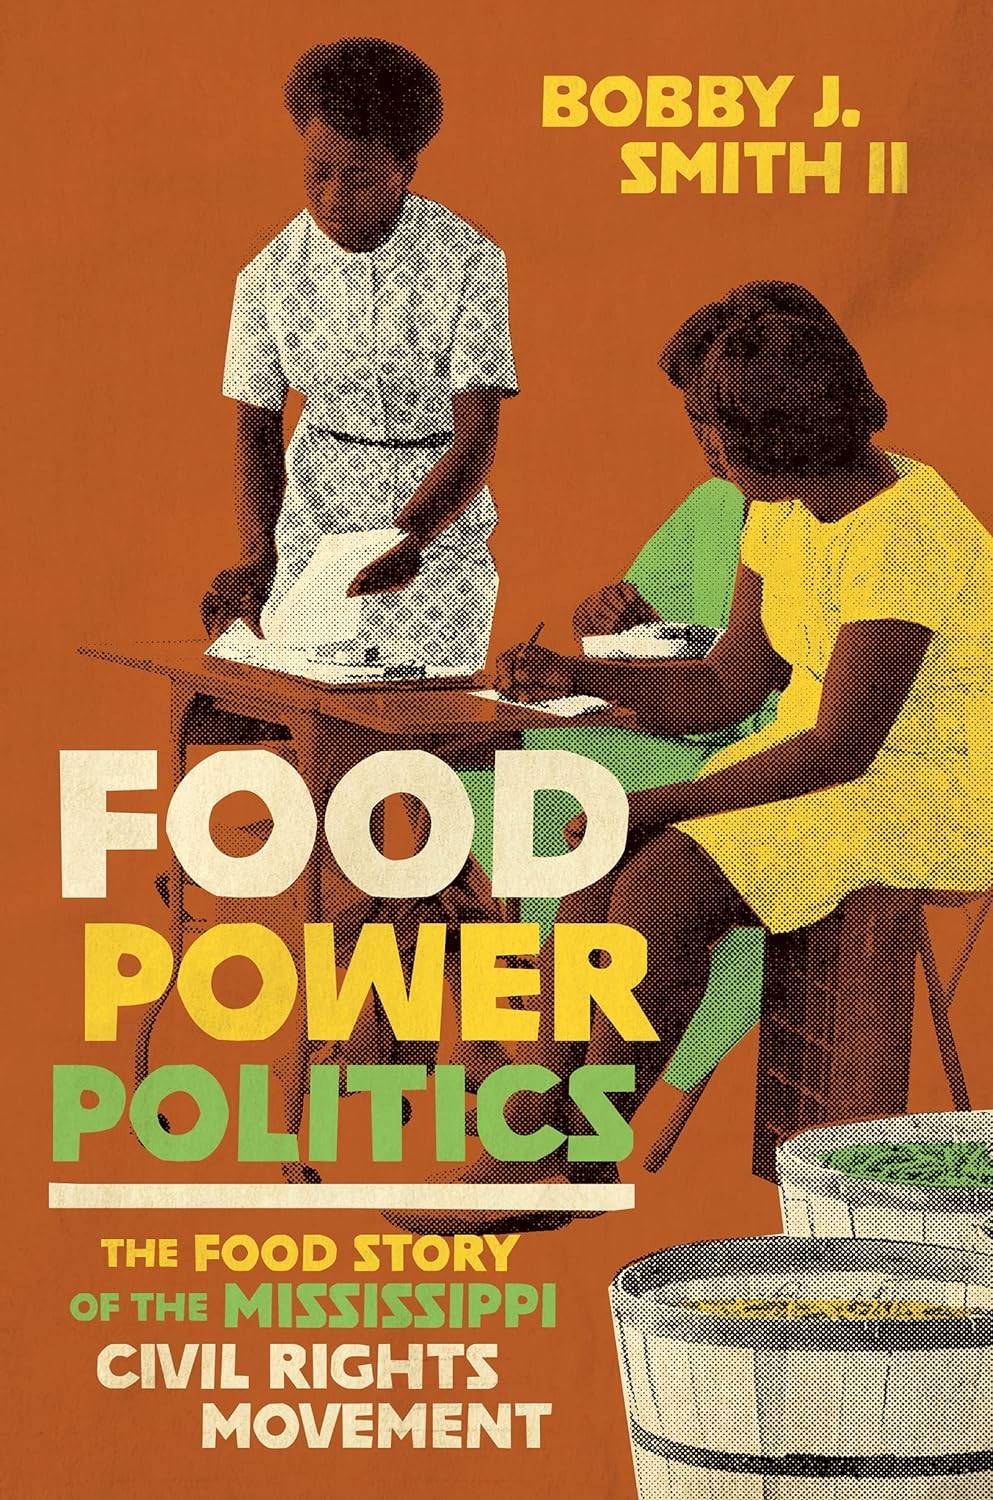 Food Power Politics: The Food Story of the Mississippi Civil Rights Movement (Black Food Justice) - Paperback